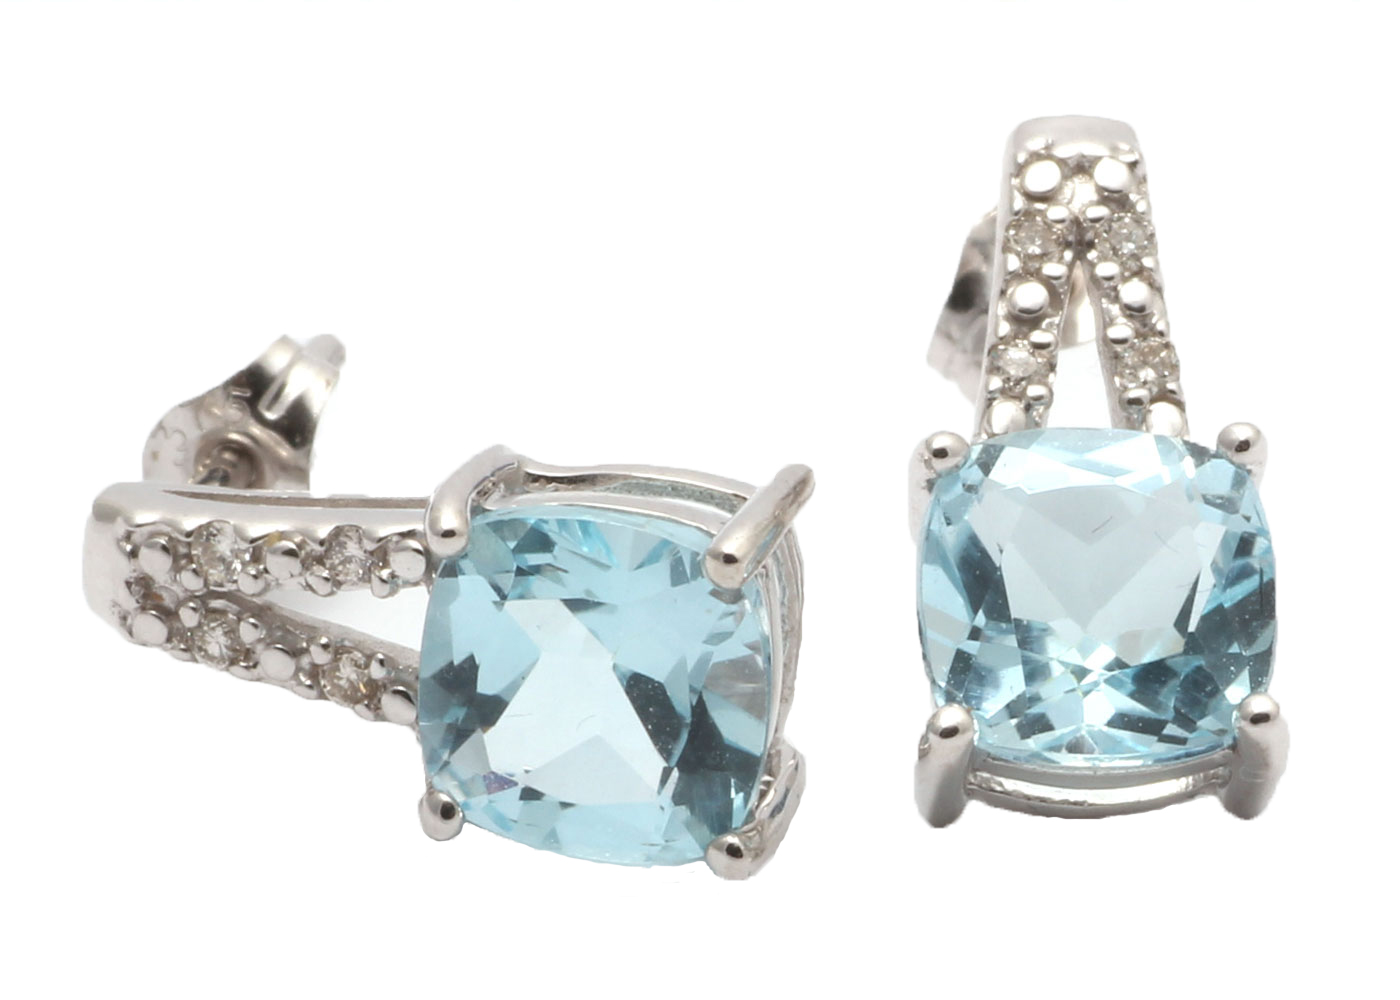 9ct White Gold Diamond And Blue Topaz Earring 0.05 Carats - Image 3 of 8